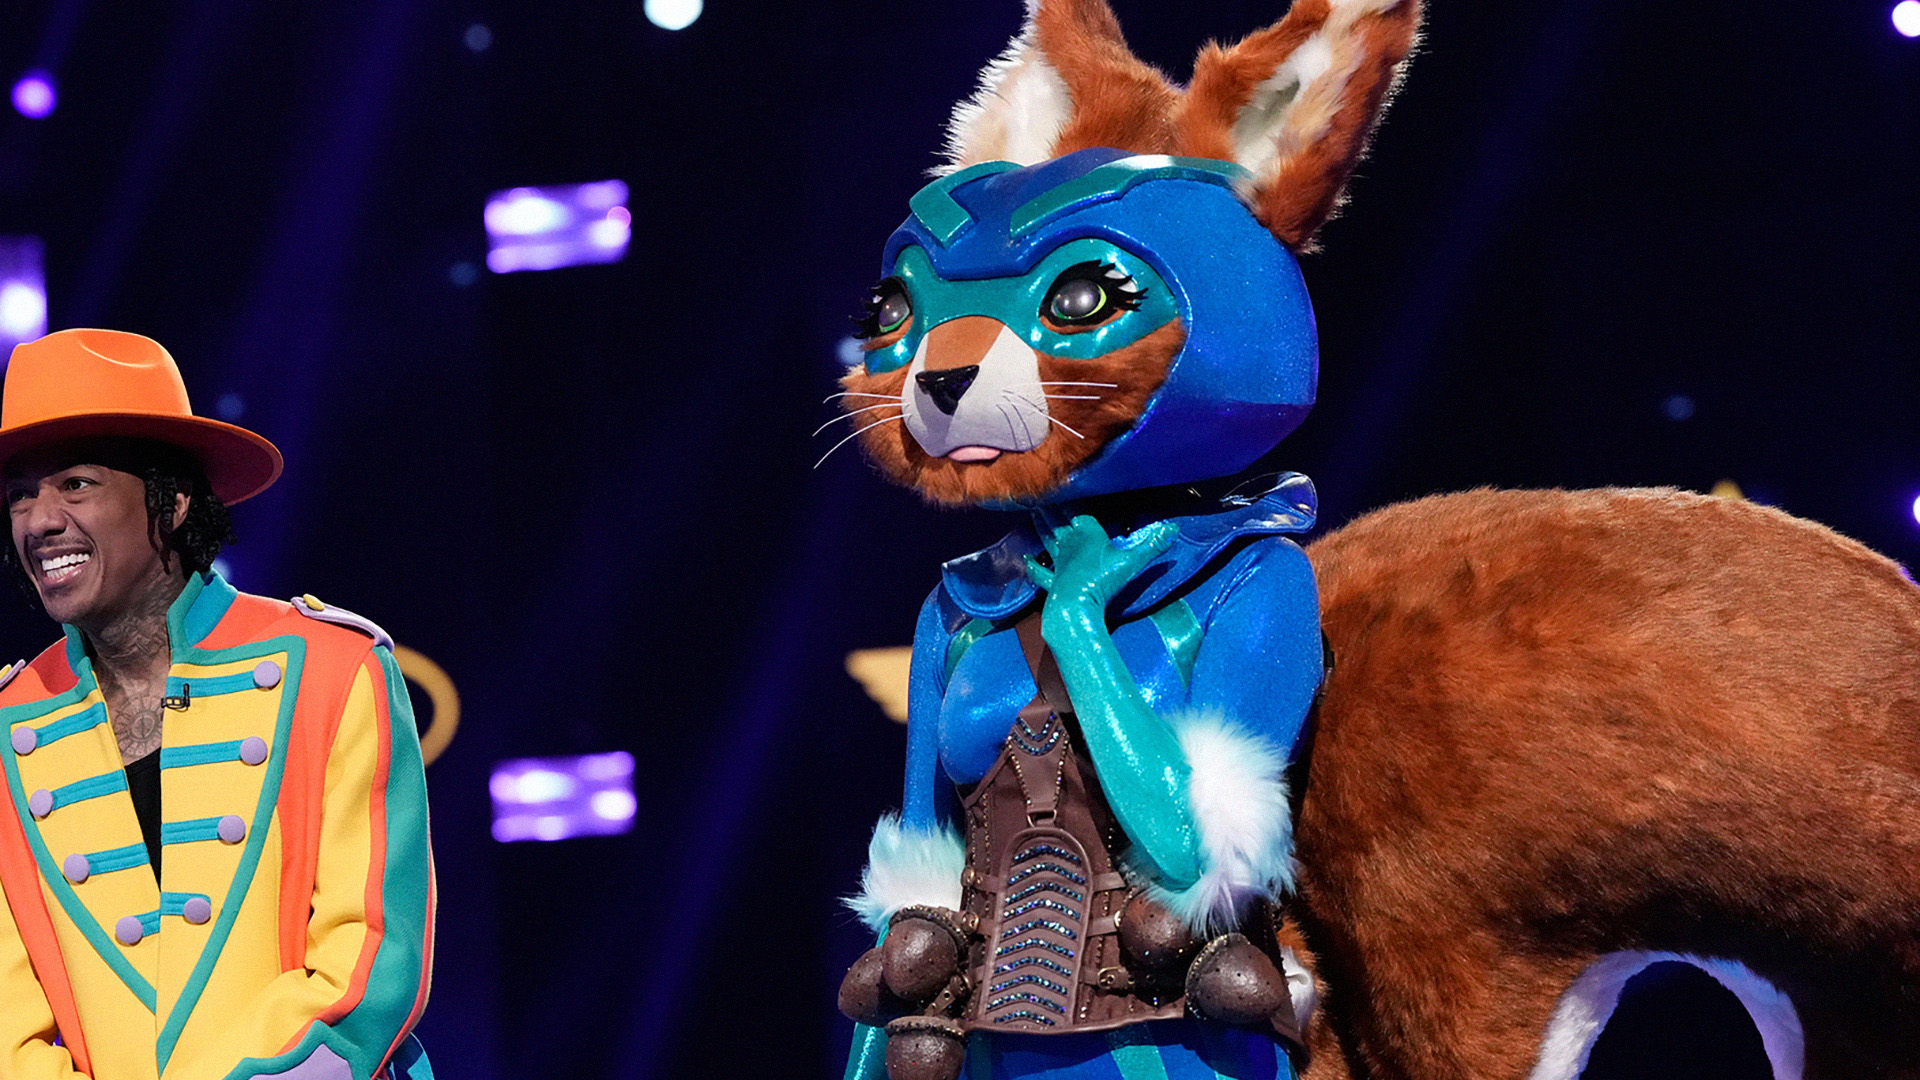 Squirrel's Secret Identity Revealed? The Masked Singer Fans Have a Theory